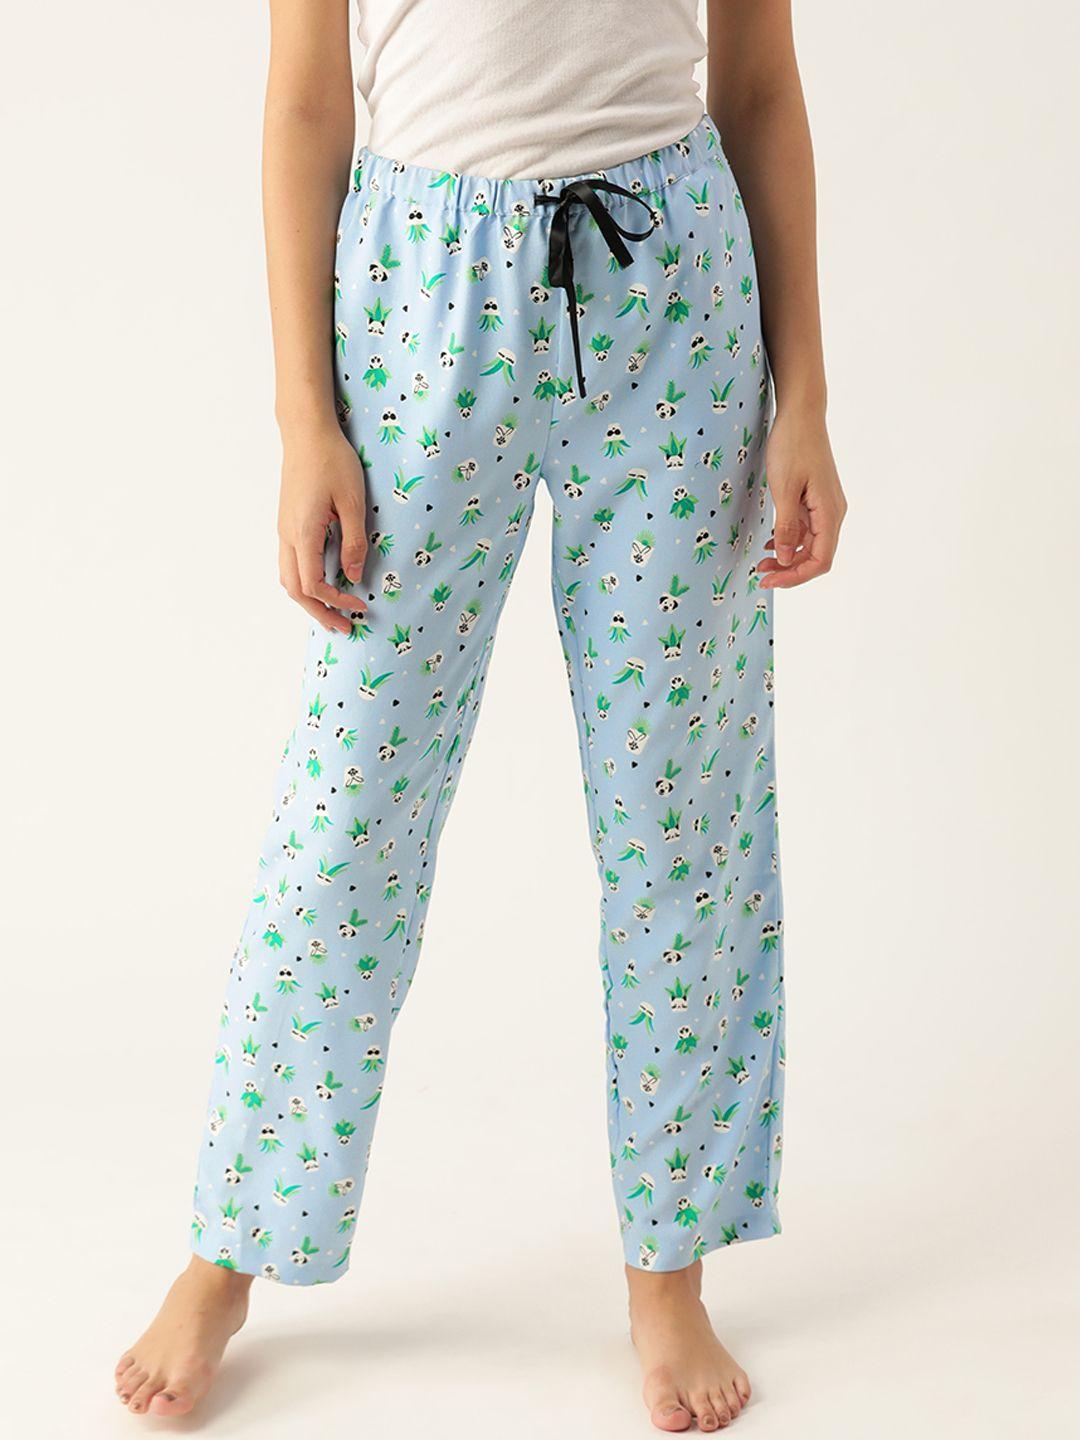 dressberry women blue & white graphic printed lounge pants